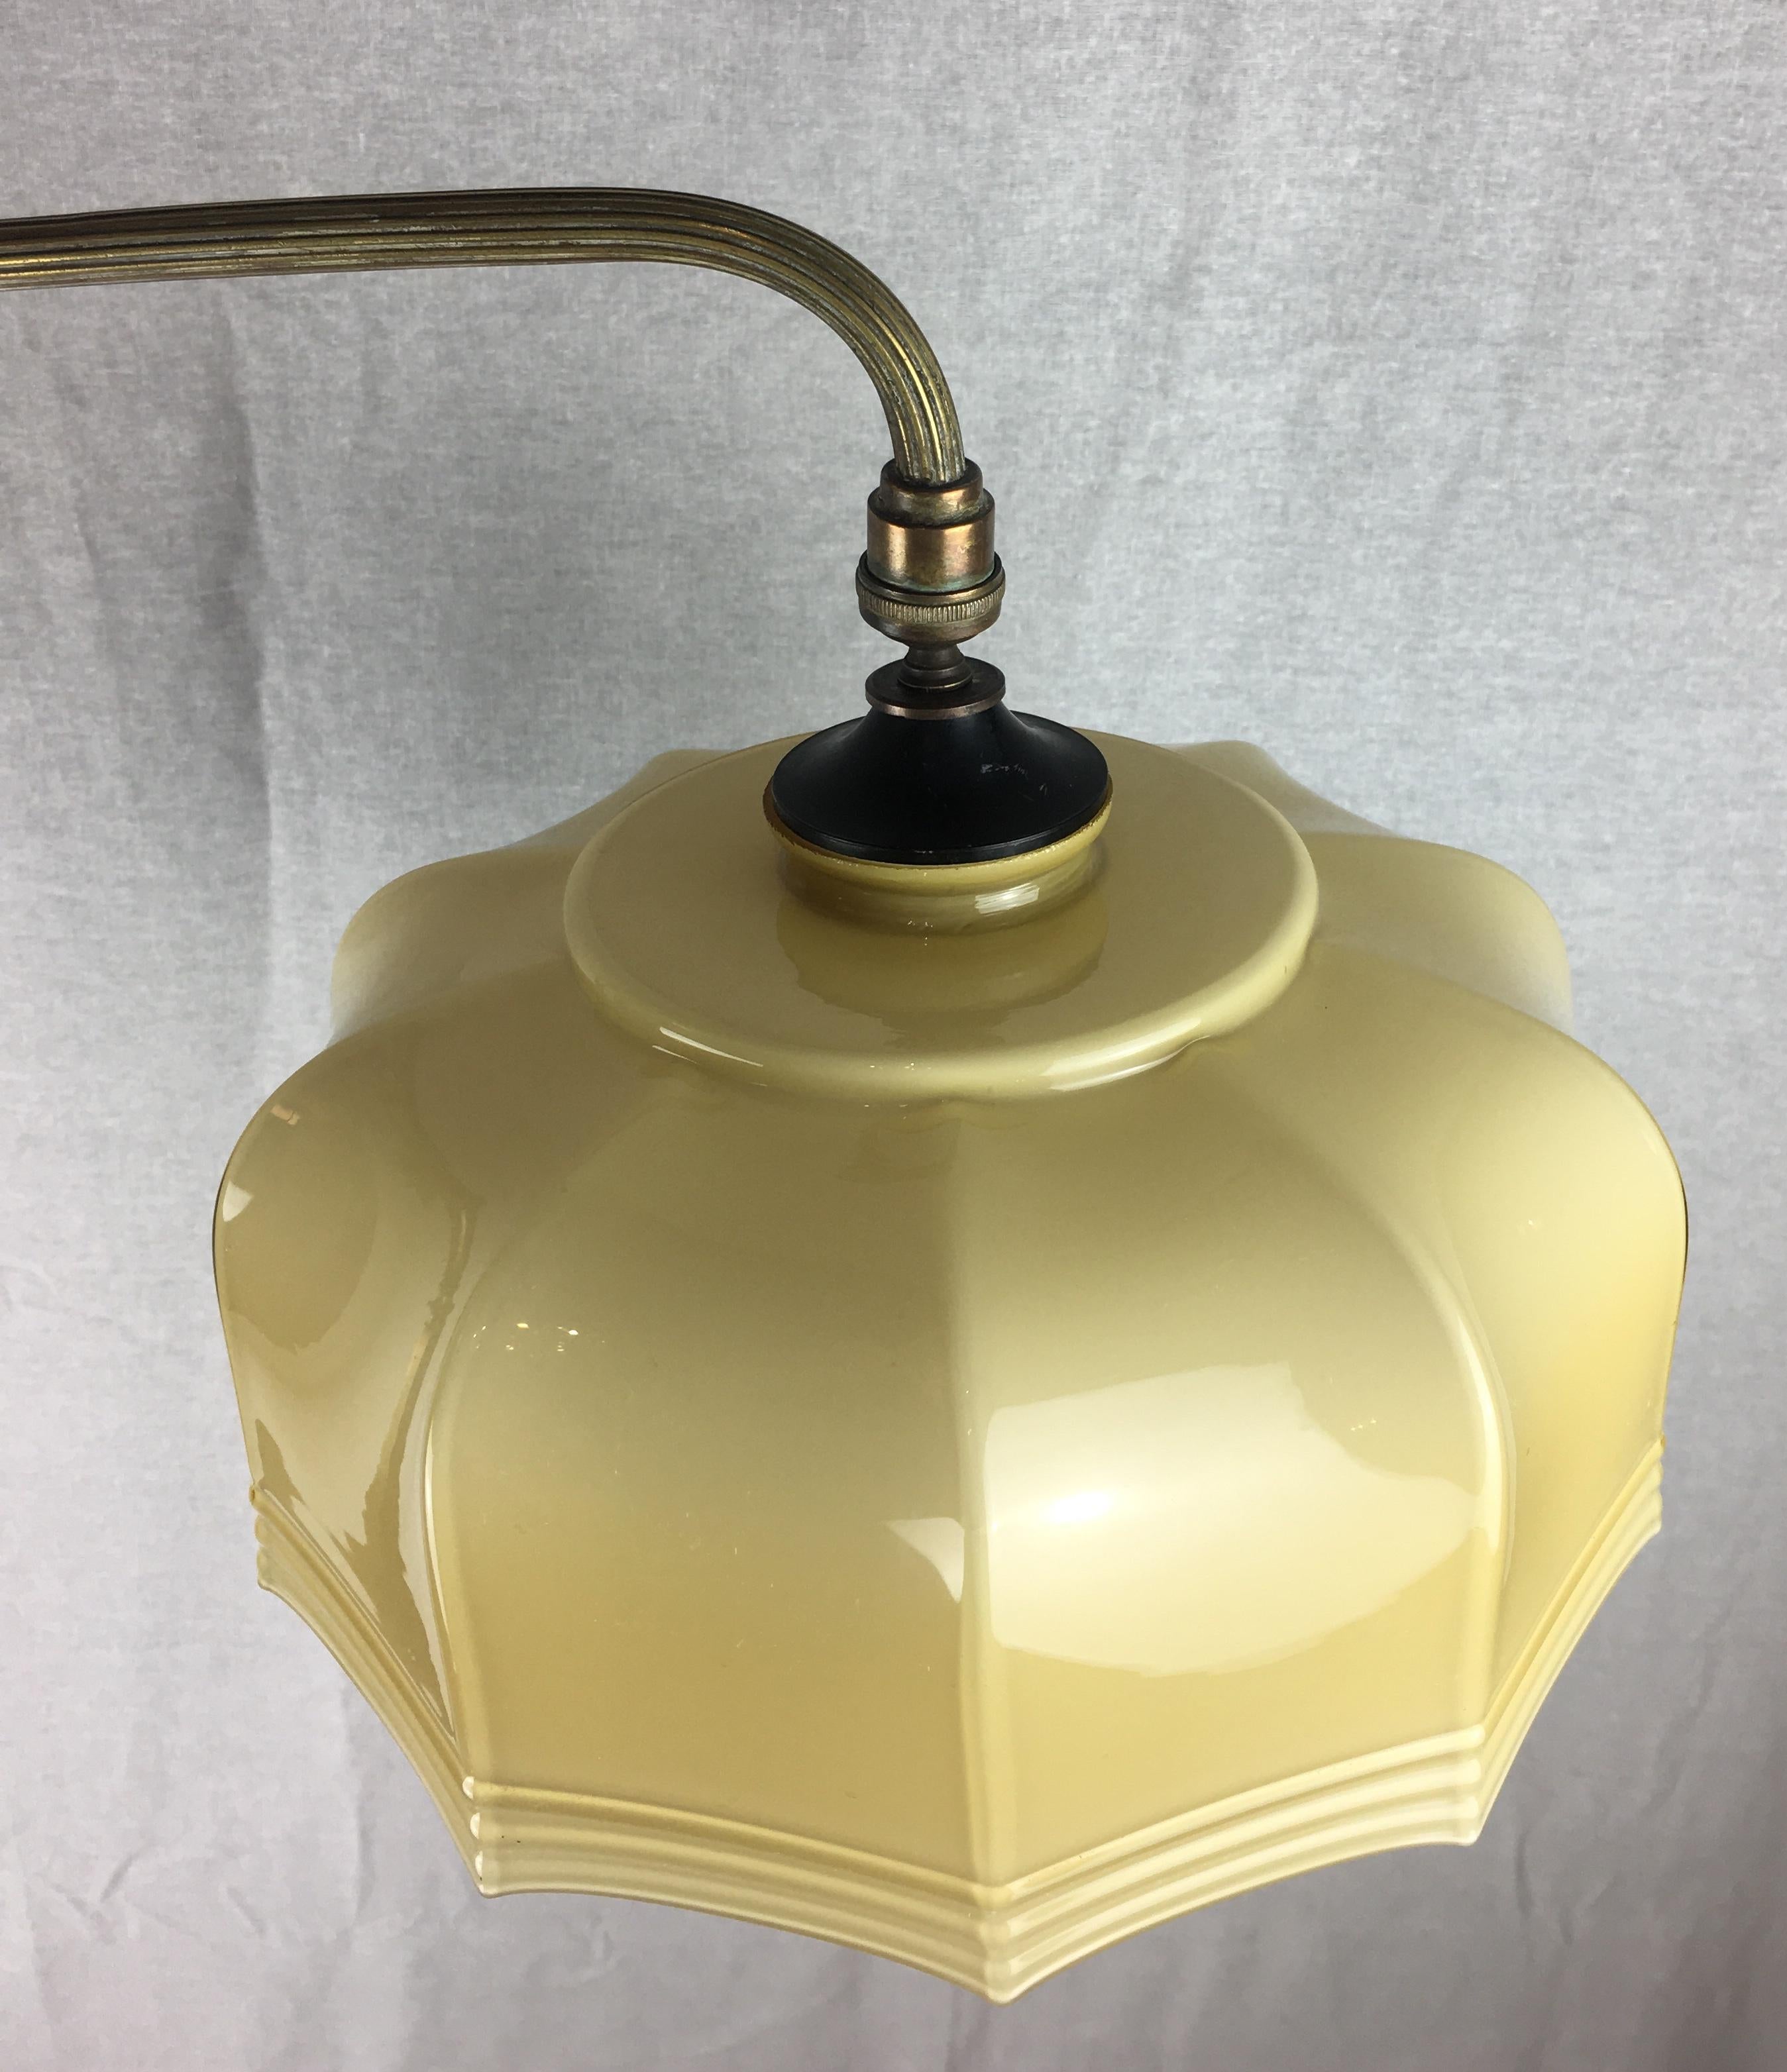 An important iconic piece of American history, this beautiful Art Nouveau, Art Deco brass floor lamp embodies all the classical elements of the era. Made by and stamped Artistic Brass & BZ Wks, NYC with patented number 4099.

This very stylish floor